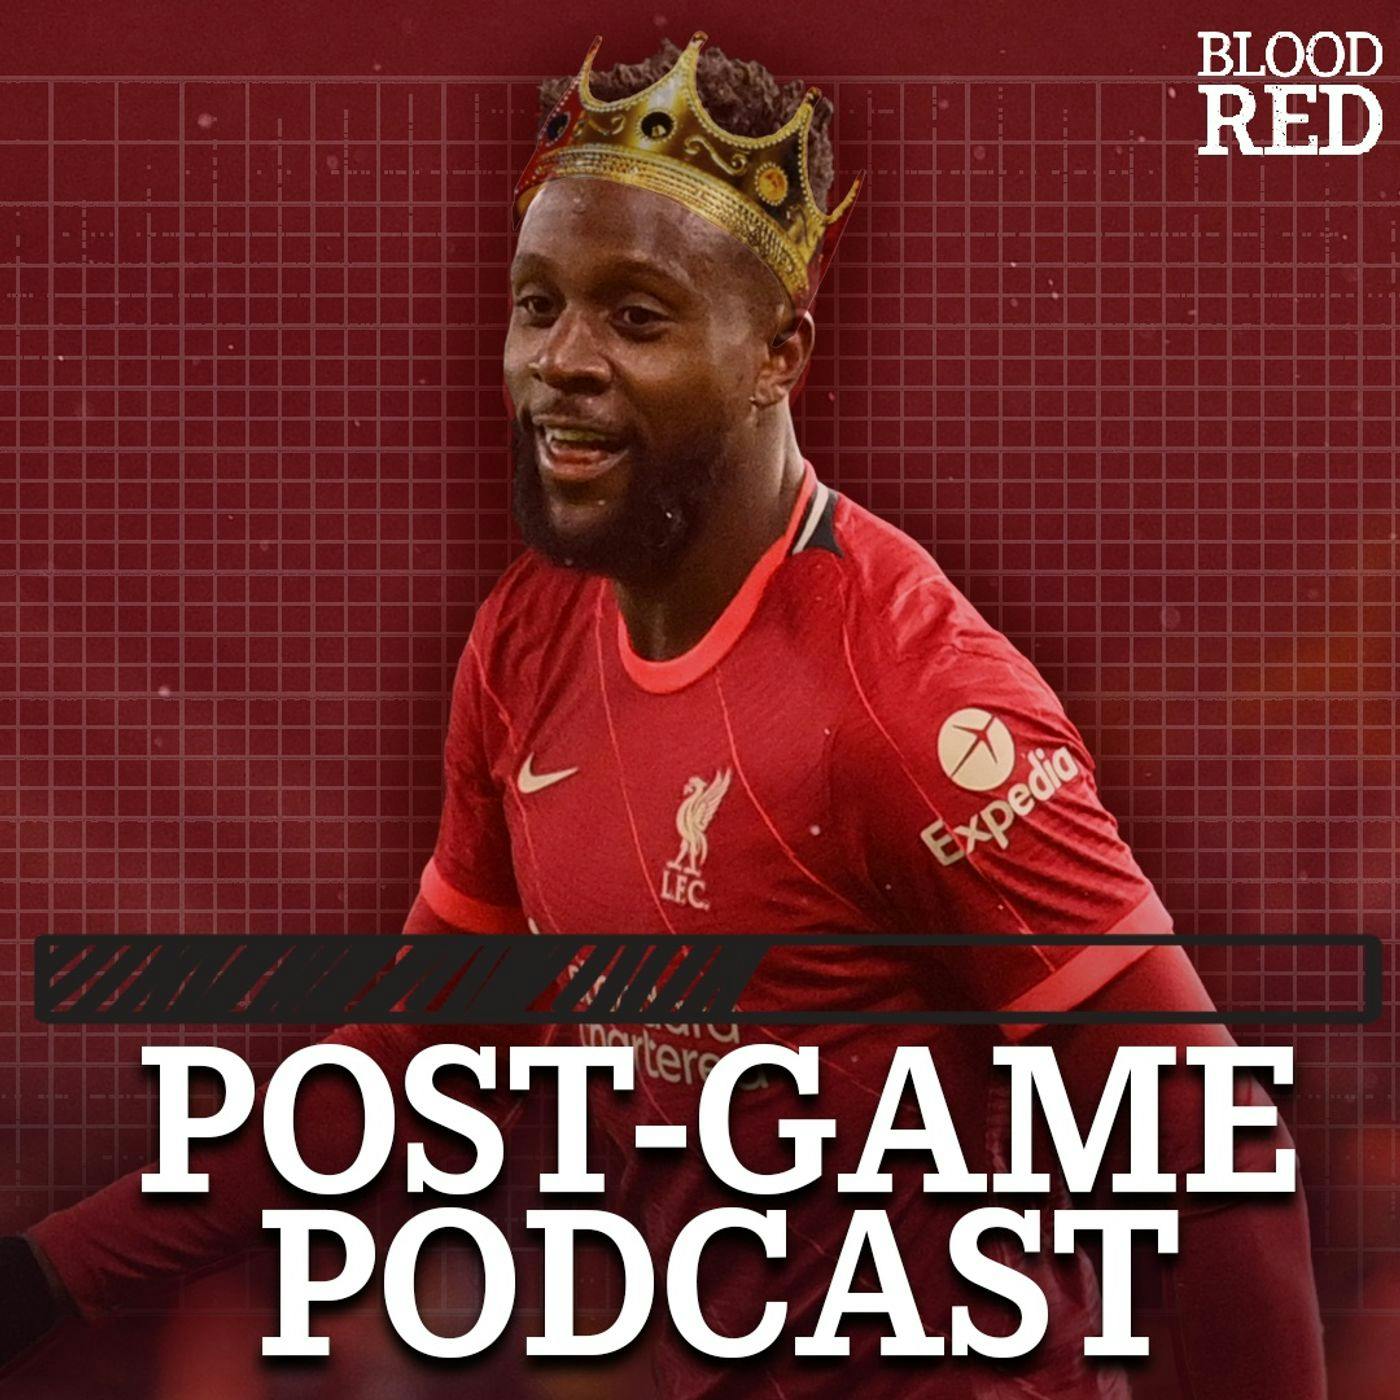 Post-Game: 'All hail the King!' Divock Origi Rescues Three Points for Liverpool with Last-Gasp Winner at Wolves